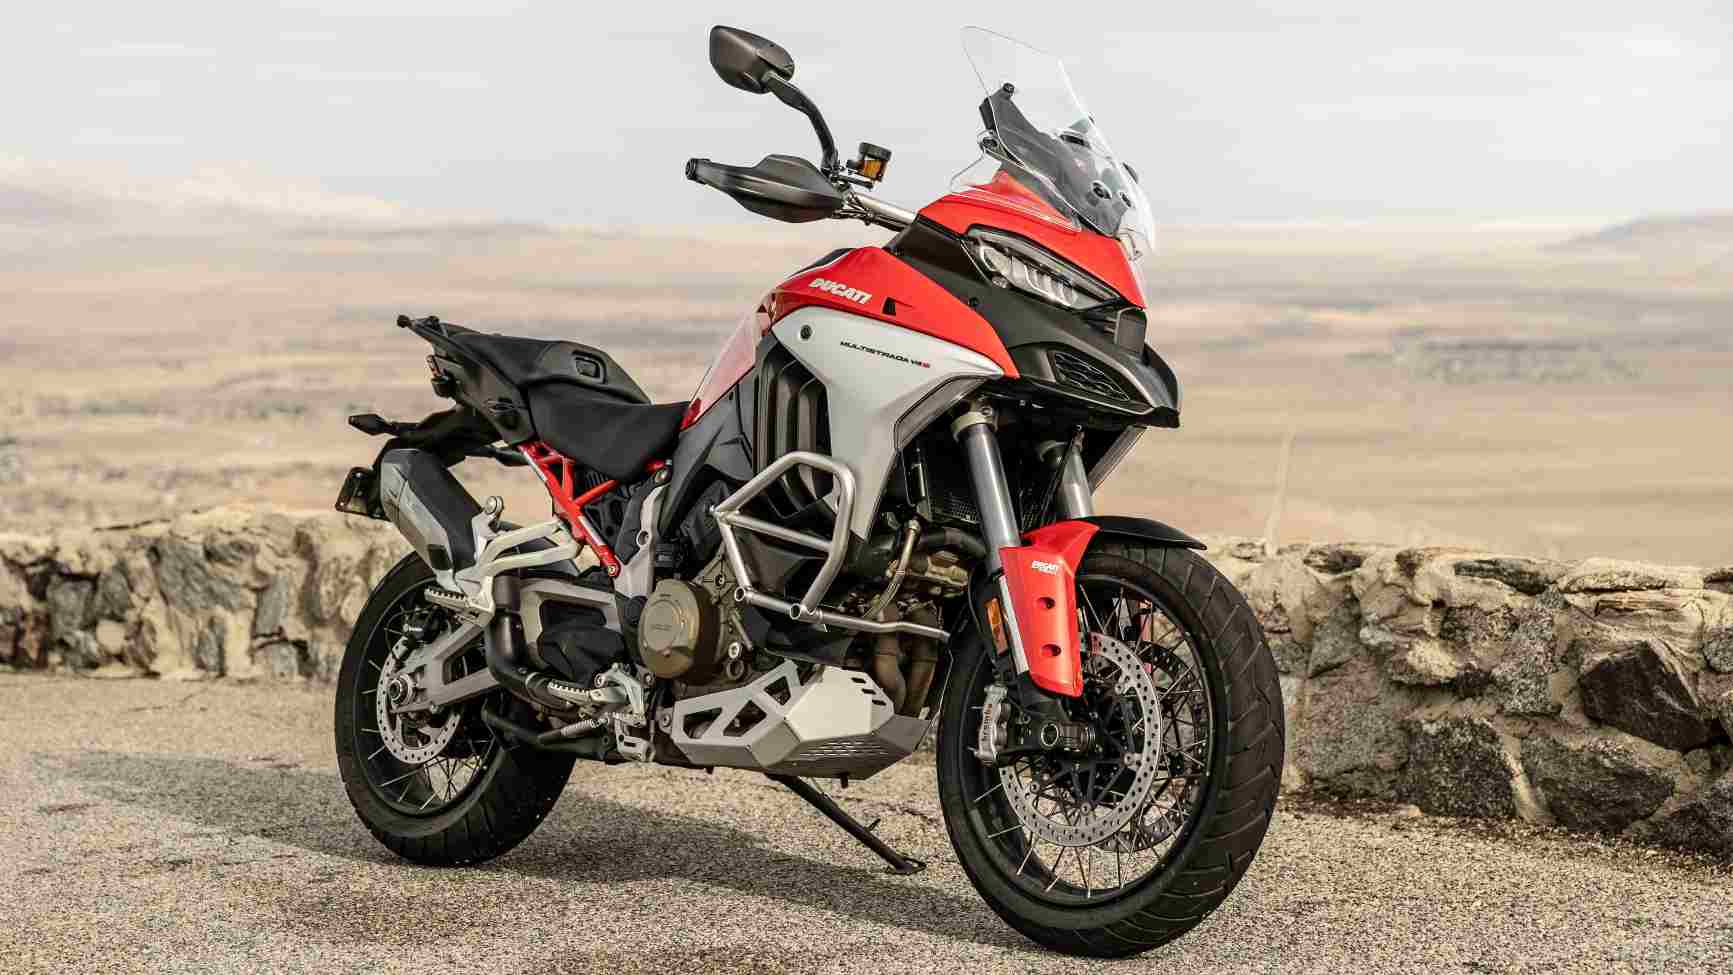 The Ducati Multistrada V4 is the first production motorcycle to feature a front and rear radar rider-assistance system. Image: Ducati